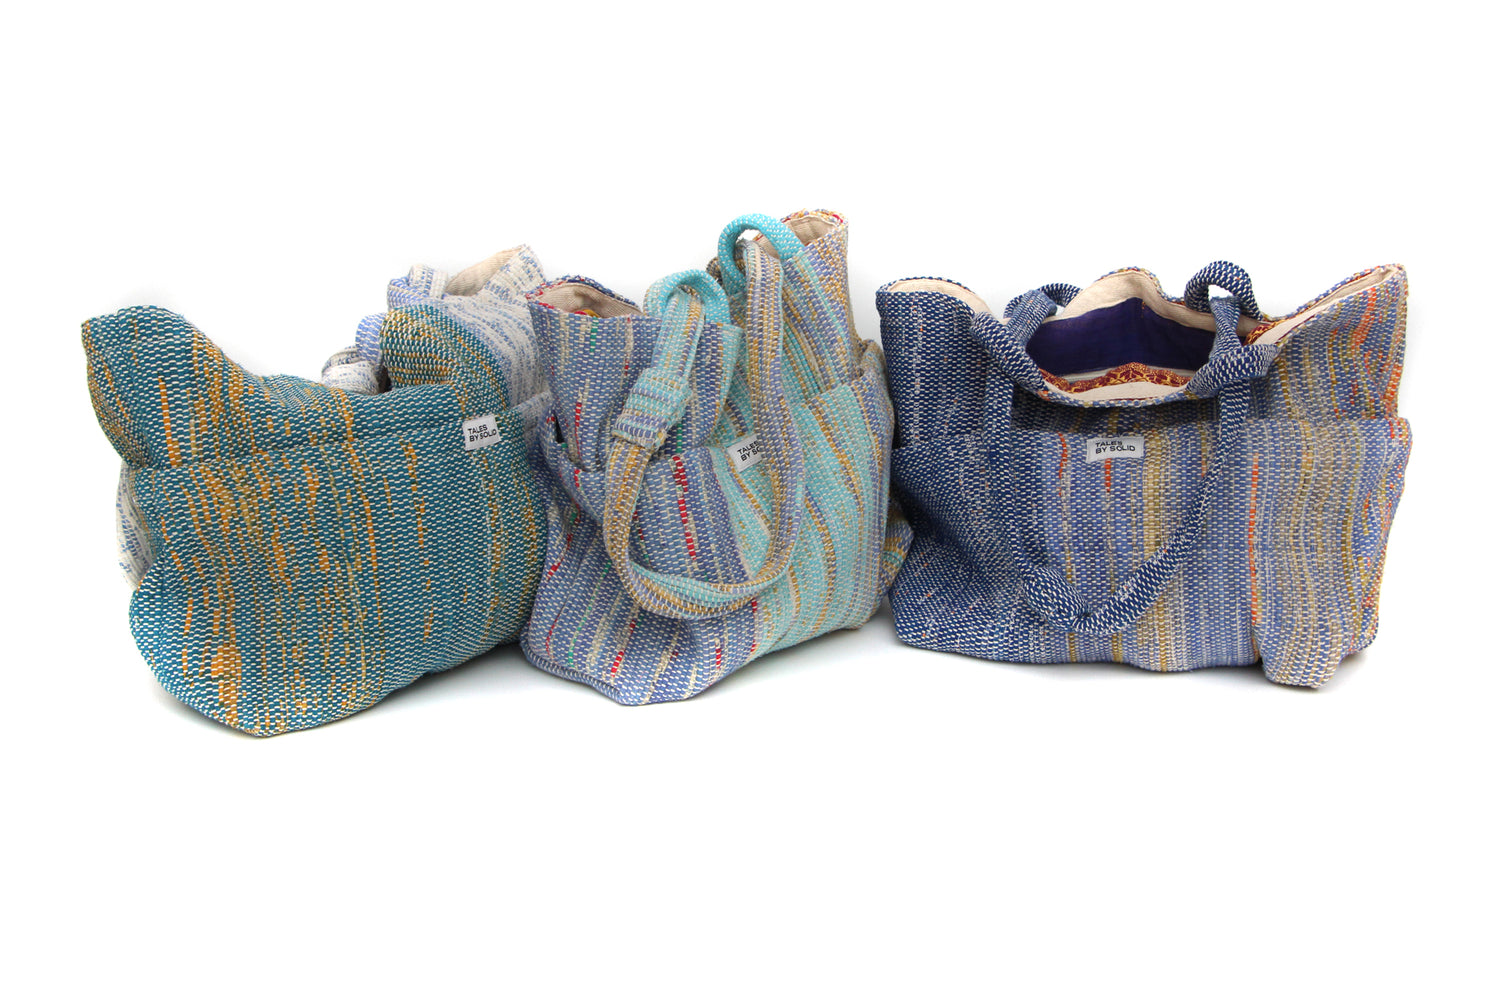 Small Sari Bag 04 - Handcrafted Elegance with a Sustainable Story